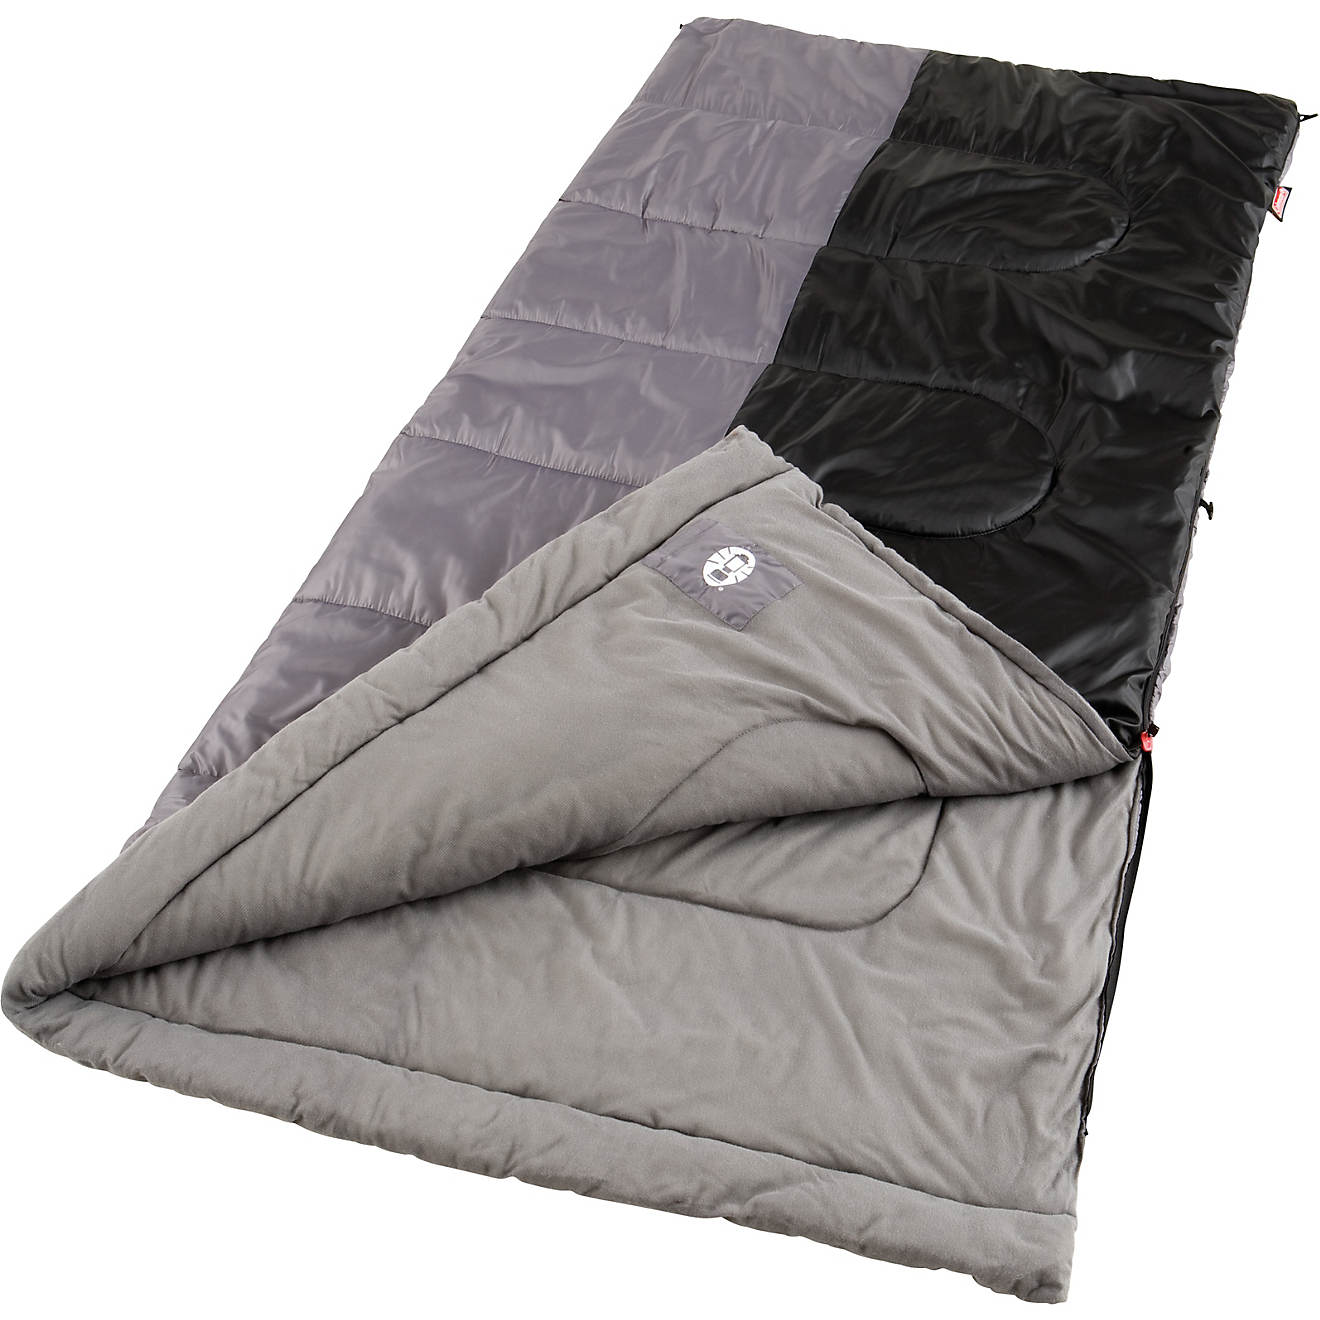 Coleman Biscayne 40 Degree F Big and Tall Sleeping Bag                                                                           - view number 1